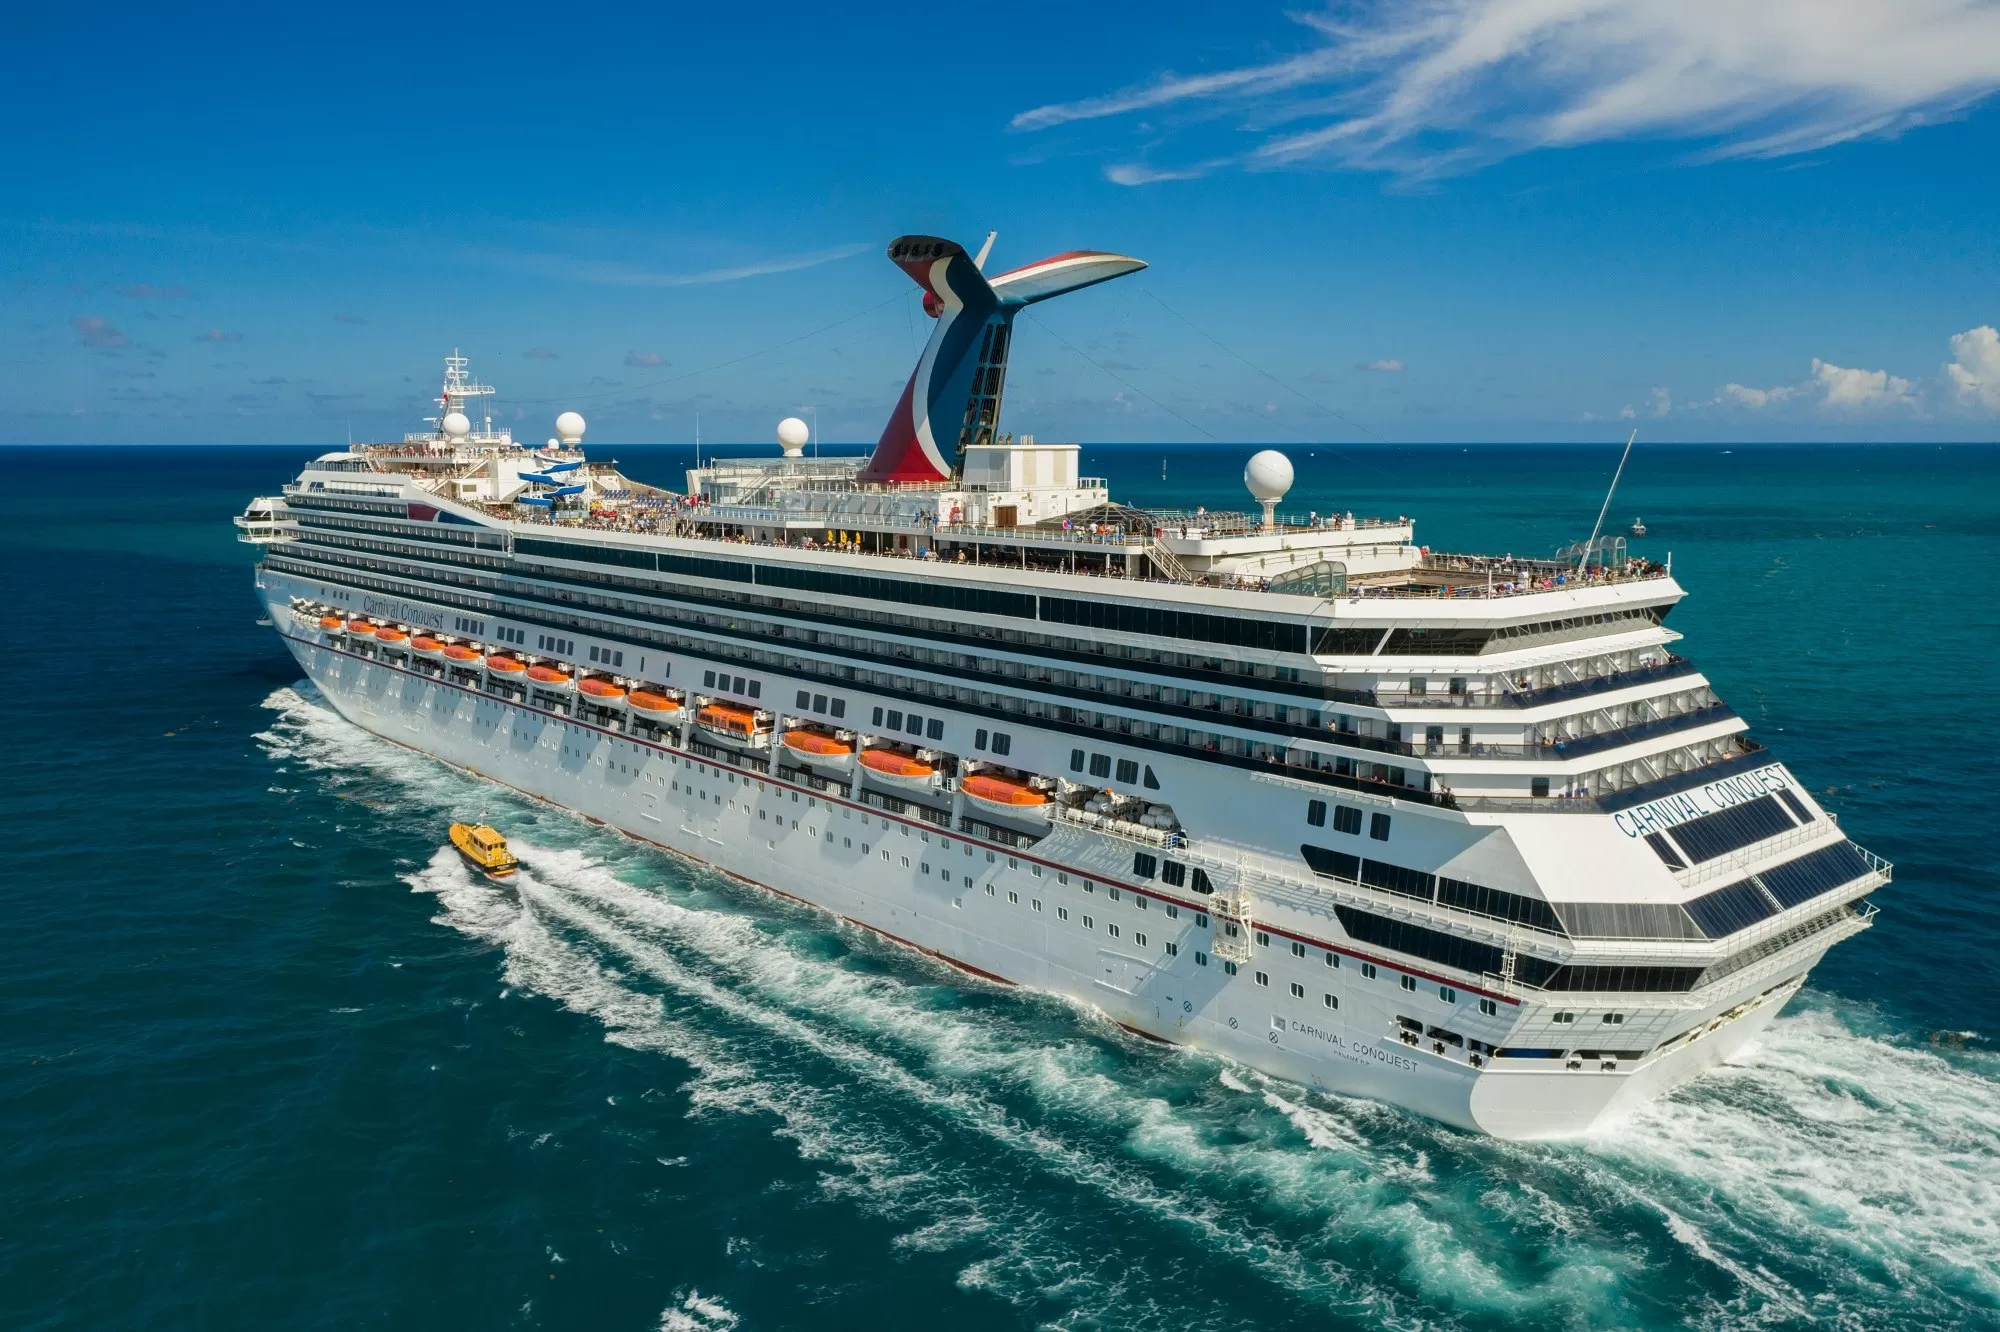 Cruise line giant Carnival Corp. suffers ransomware attack, customer data accessed